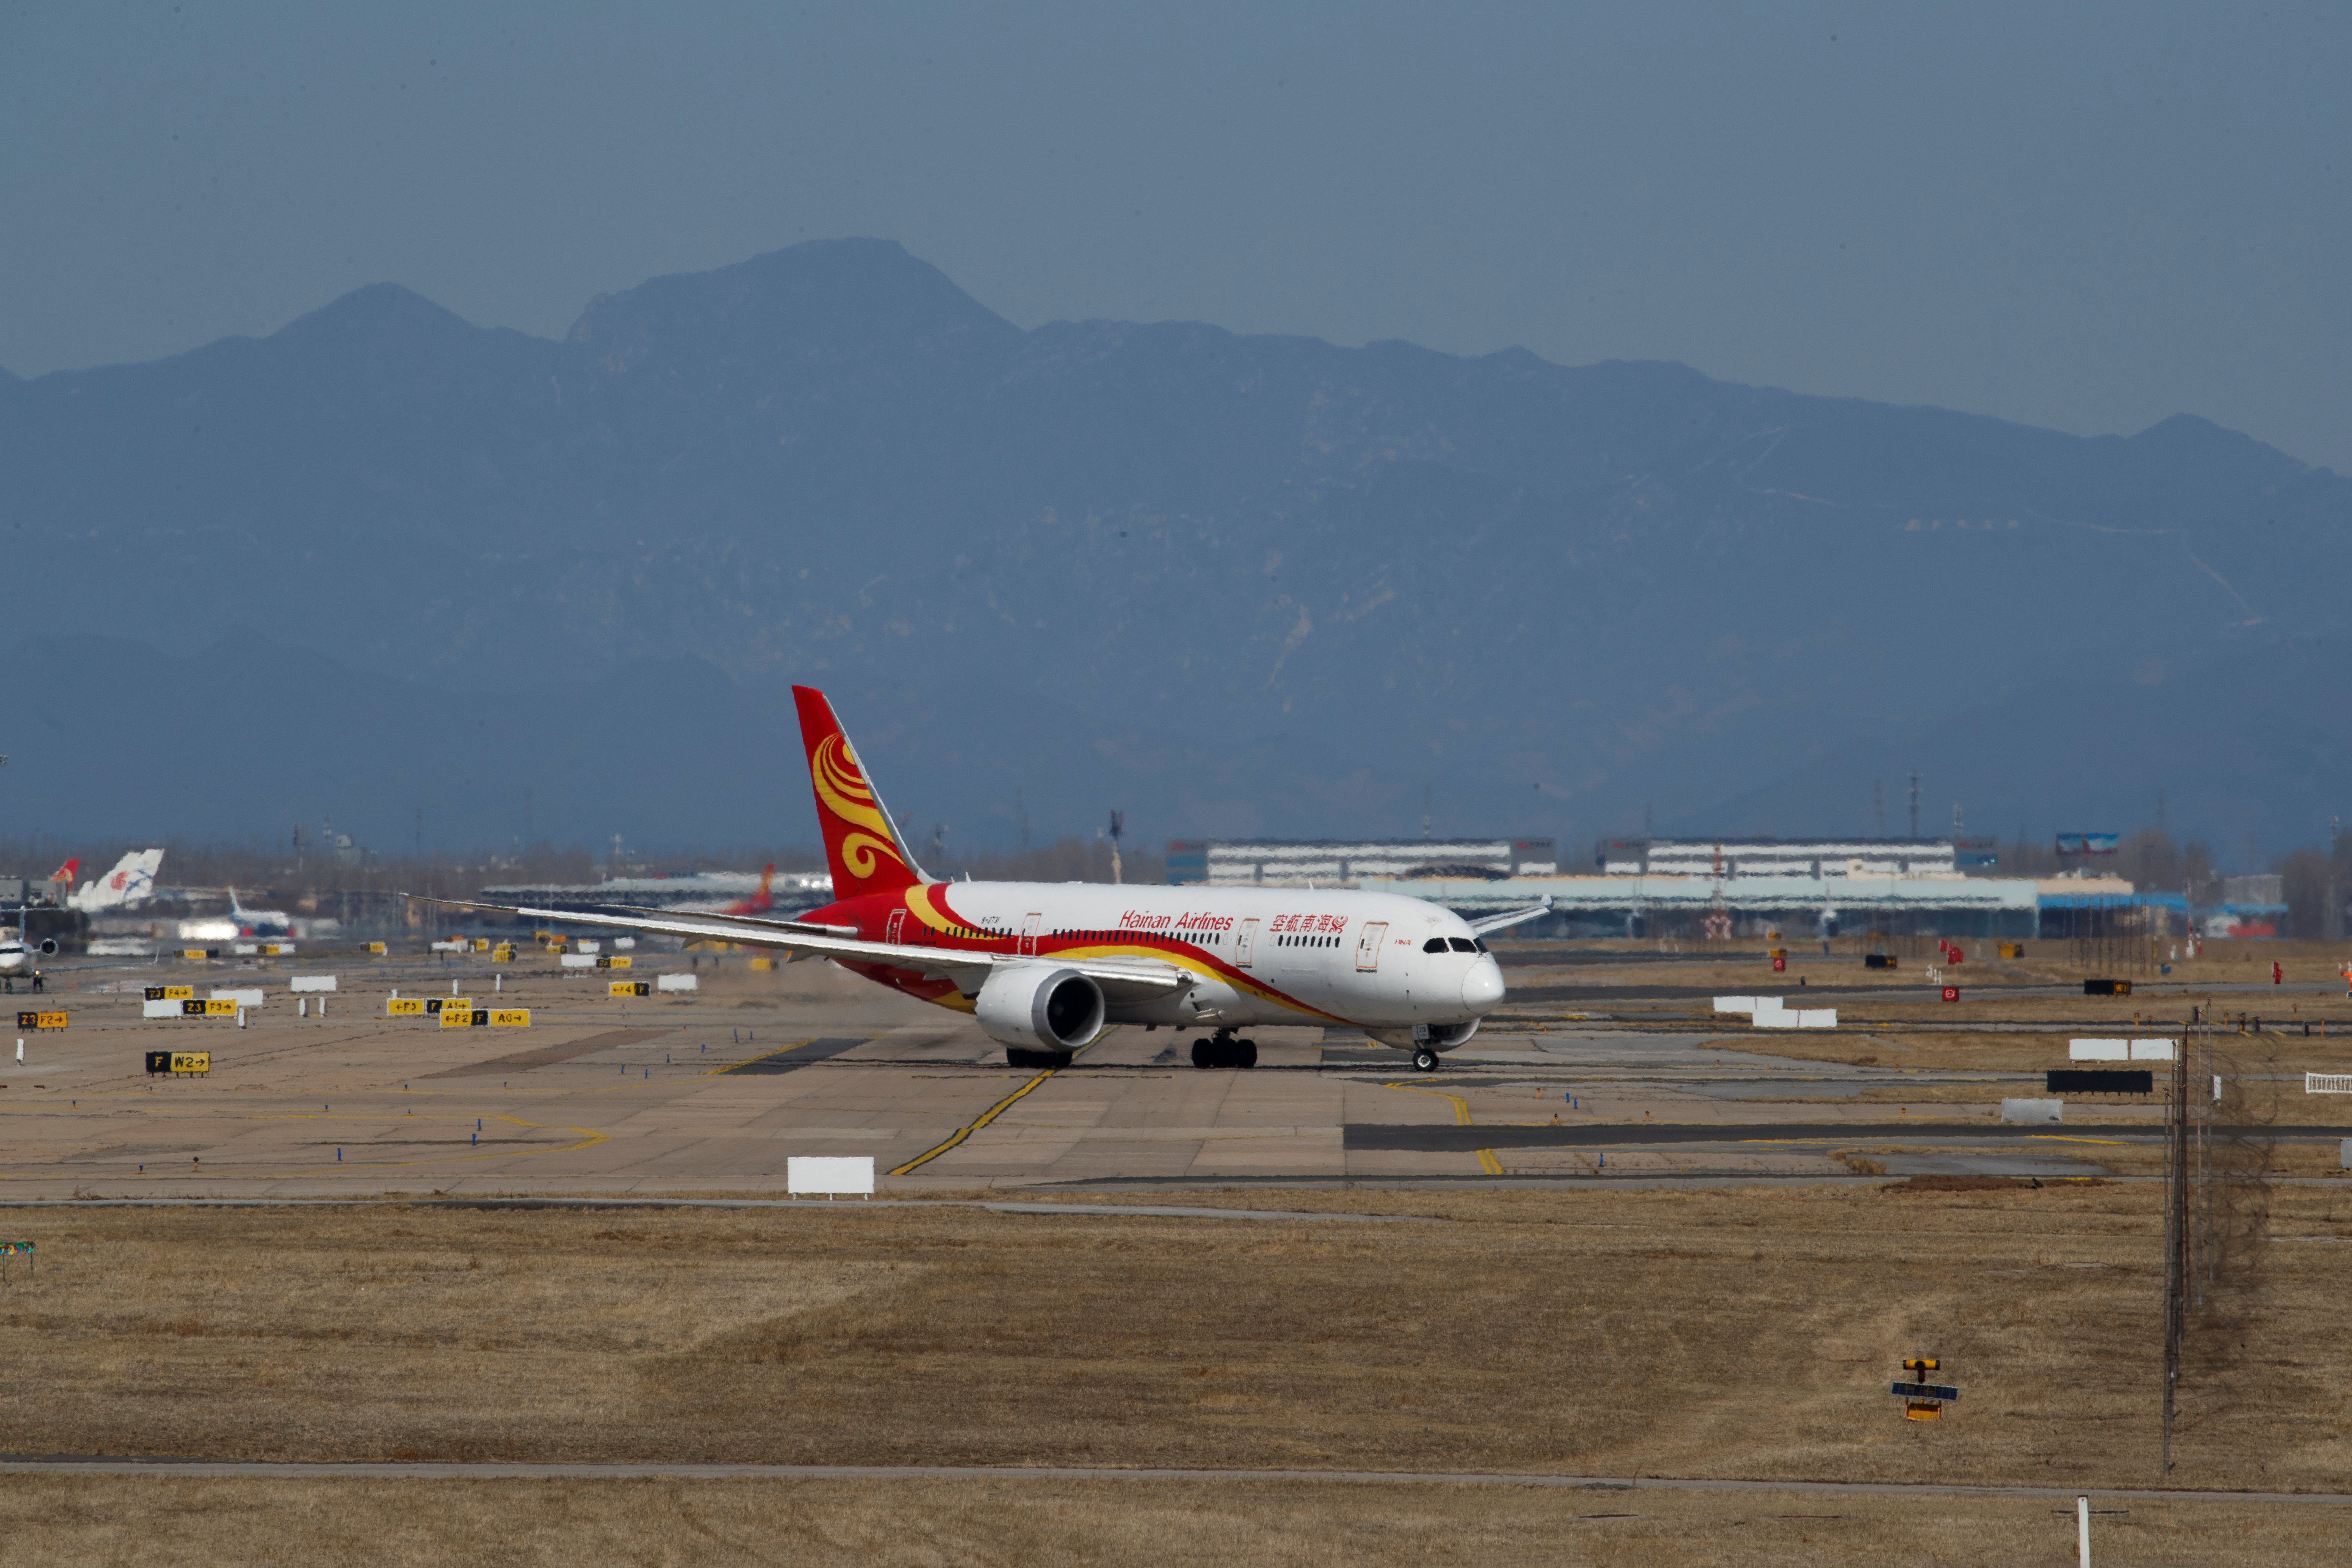 A plane of Hainan Airlines taxies at Beijing Capital International in Beijing as the country is hit by an outbreak of the novel coronavirus